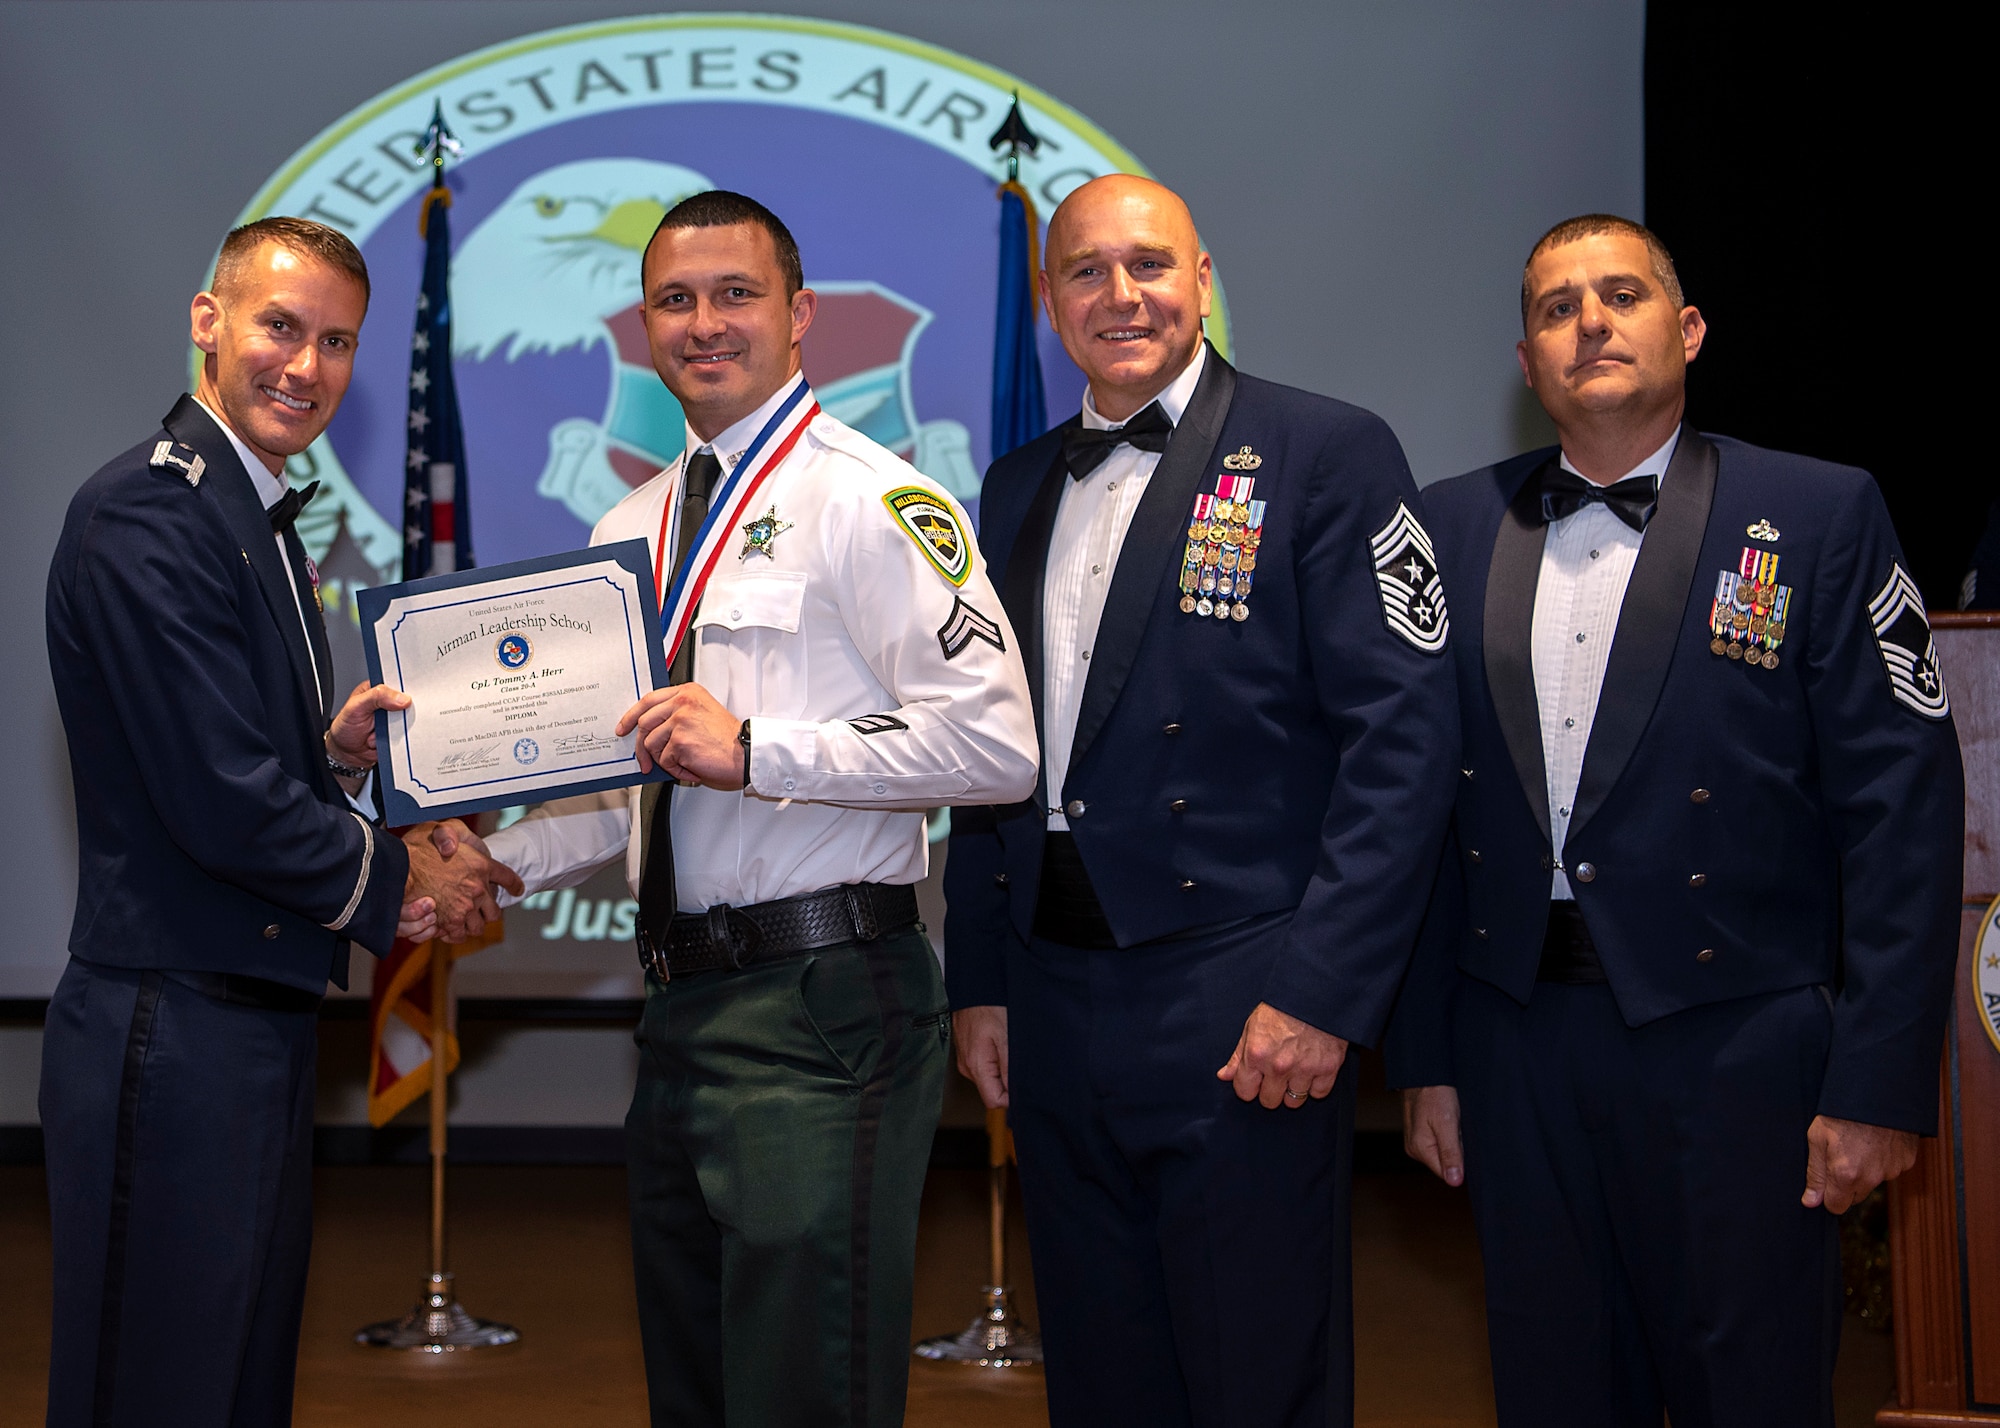 Hillsborough County Sherriff’s Office Cpl. Tommy Herr, accepts an Airman Leadership School (ALS) diploma from U.S. Air Force Col. Stephen Snelson, 6th Air Refueling Wing commander, during his ALS graduation, Dec. 4, 2019, at MacDill Air Force Base, Fla.